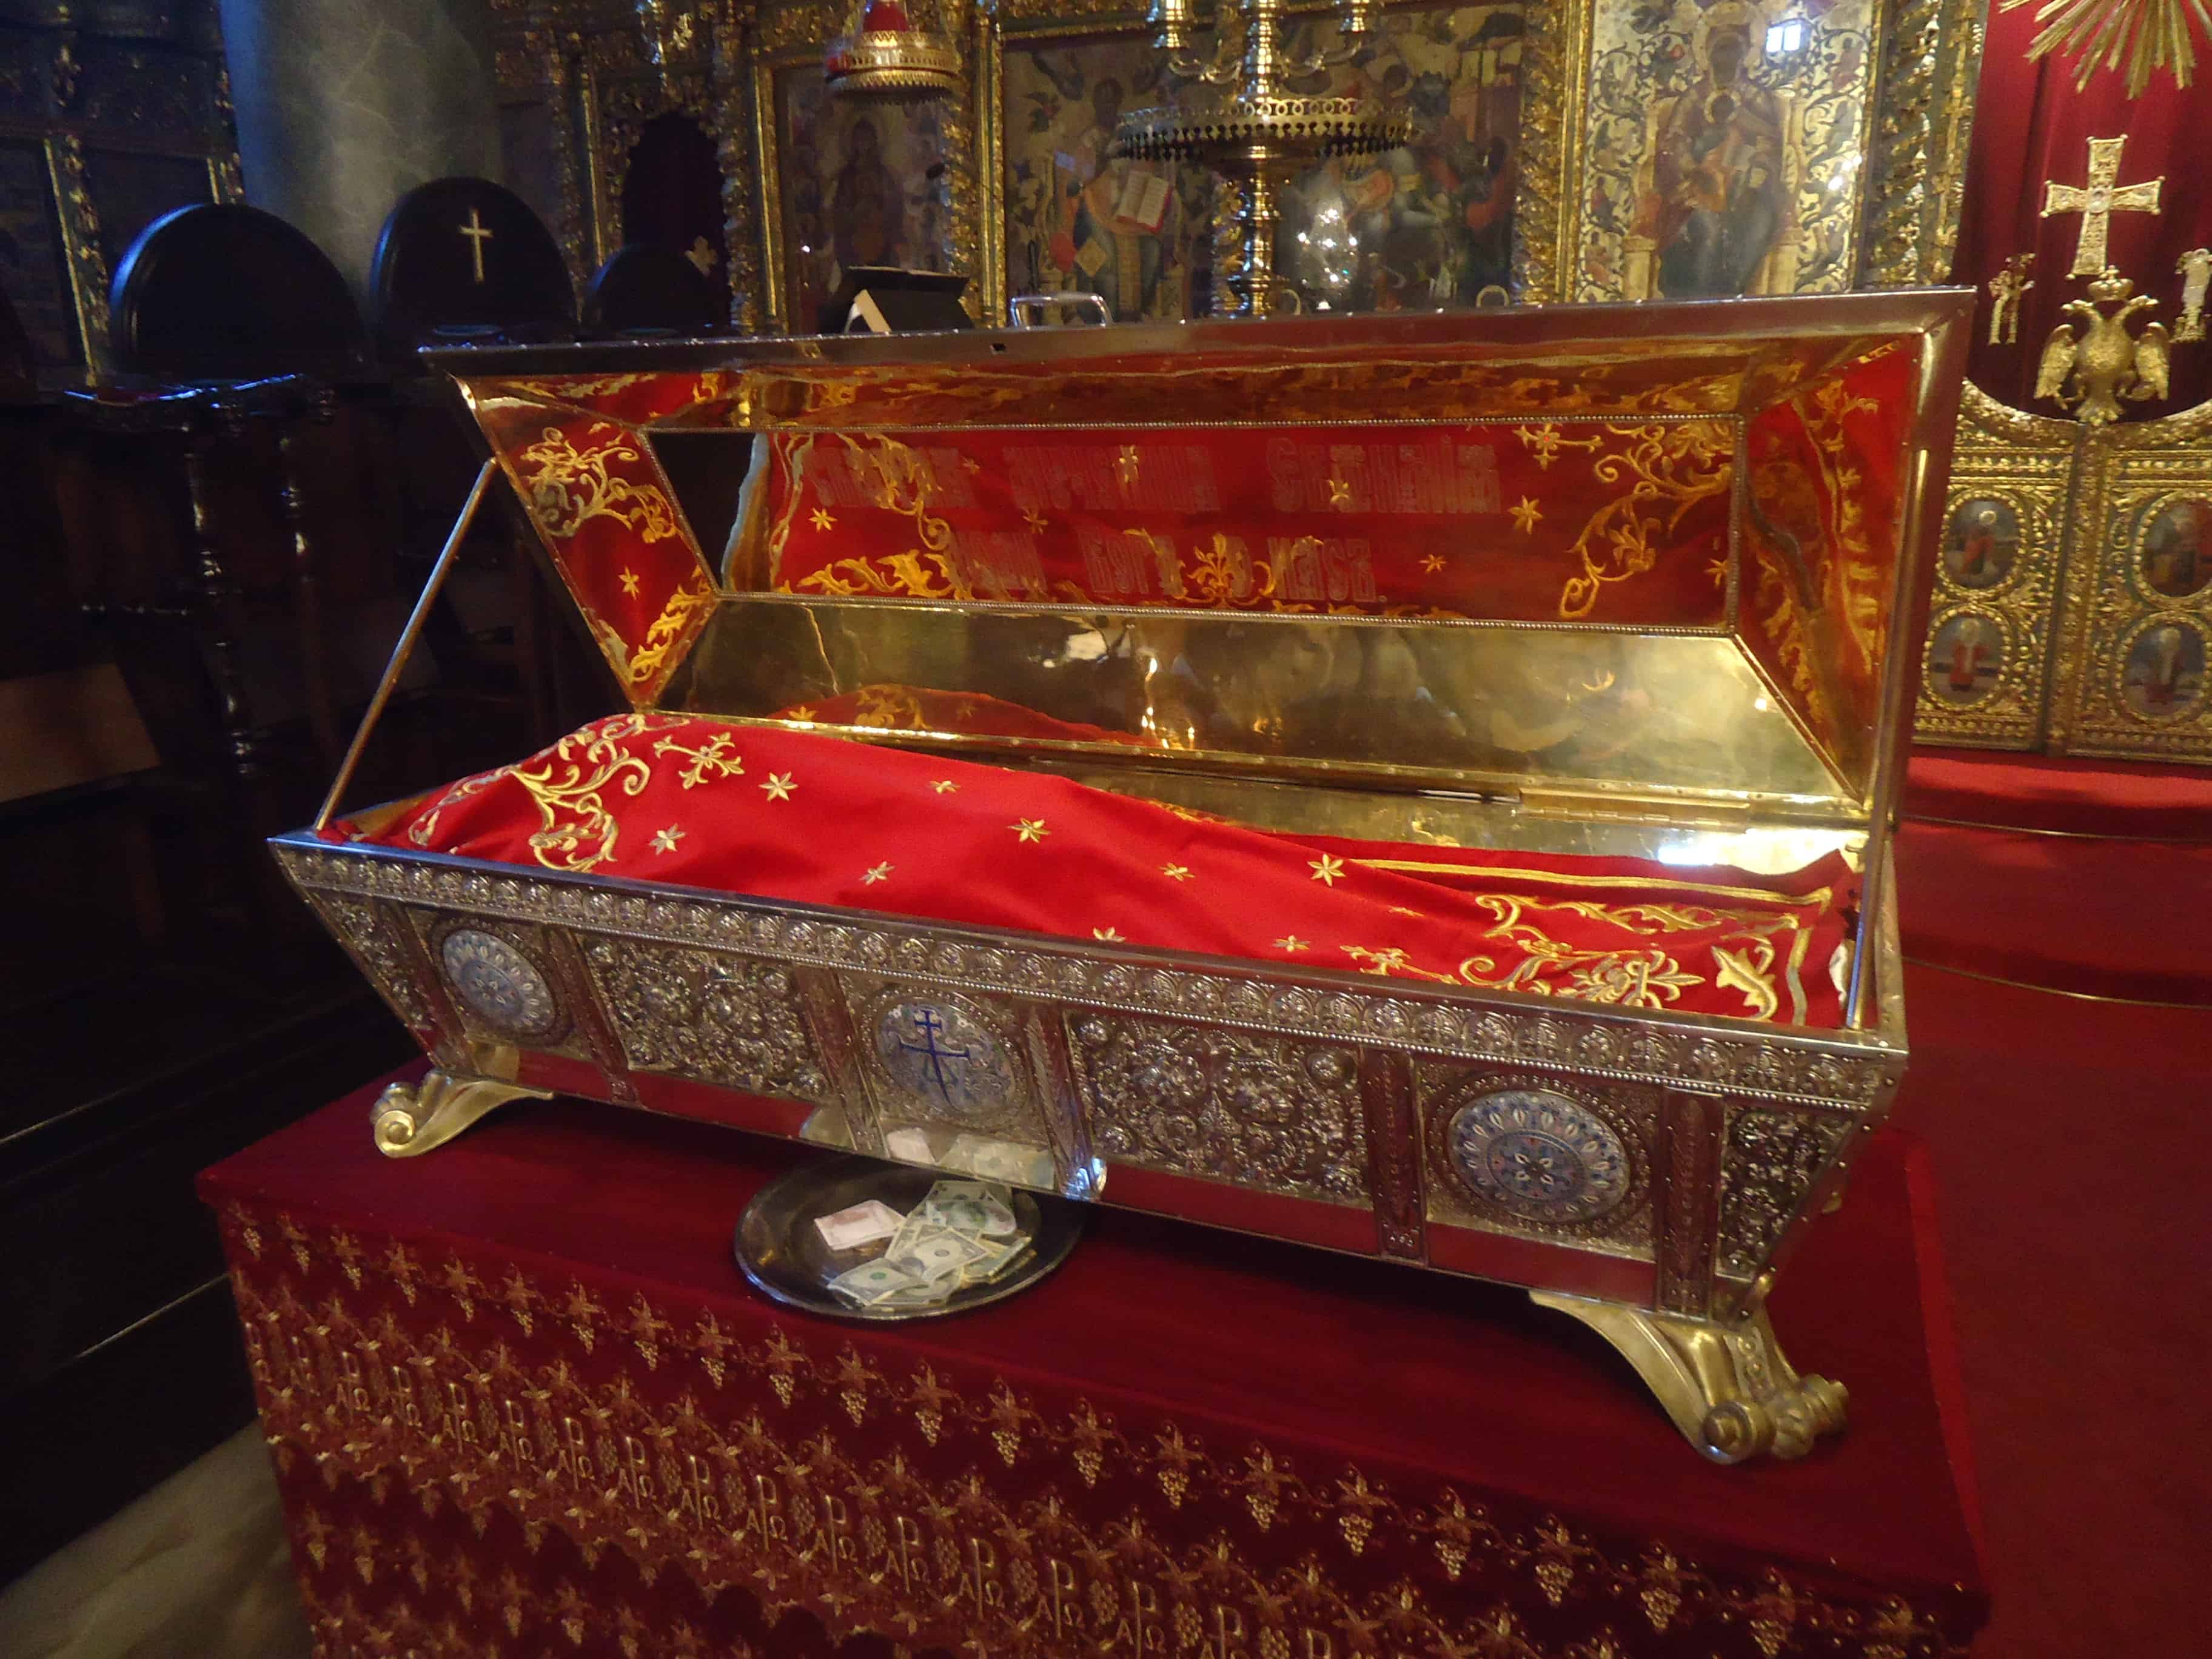 Service for St. Euphemia at the Church of St. George at the Ecumenical Patriarchate of Constantinople in Fener, Istanbul, Turkey